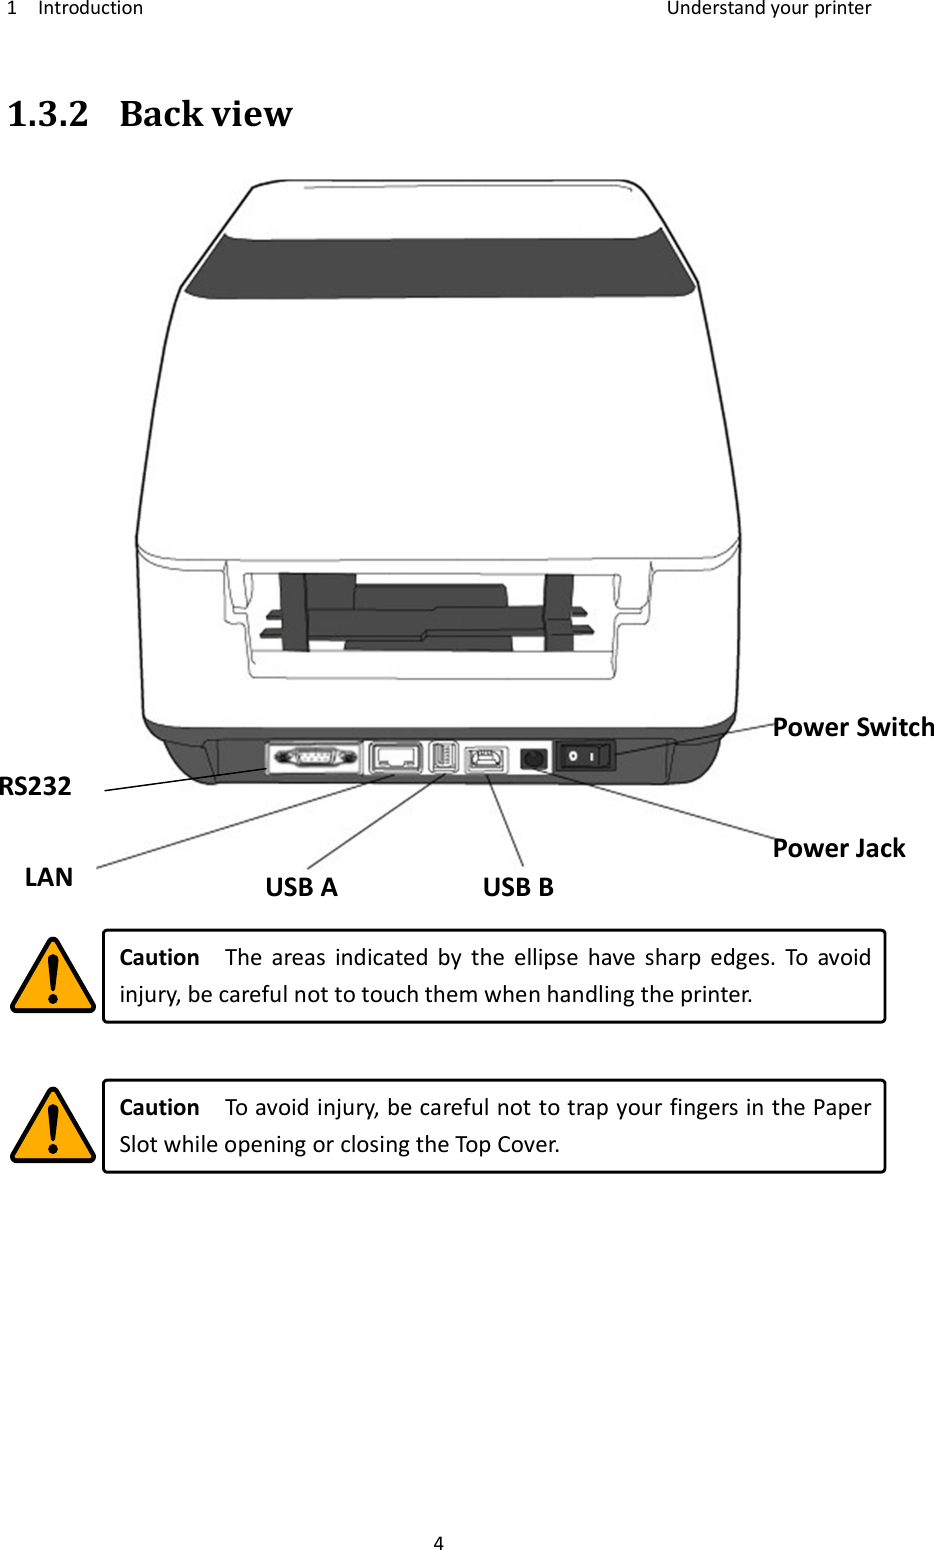 1    Introduction    Understand your printer 4 1.3.2 Back view    Caution    The  areas  indicated  by  the  ellipse  have  sharp  edges.  To  avoid injury, be careful not to touch them when handling the printer.   Caution    To avoid injury, be careful not to trap your fingers in the Paper Slot while opening or closing the Top Cover.   RS232 LAN  USB A  USB B Power Jack Power Switch 